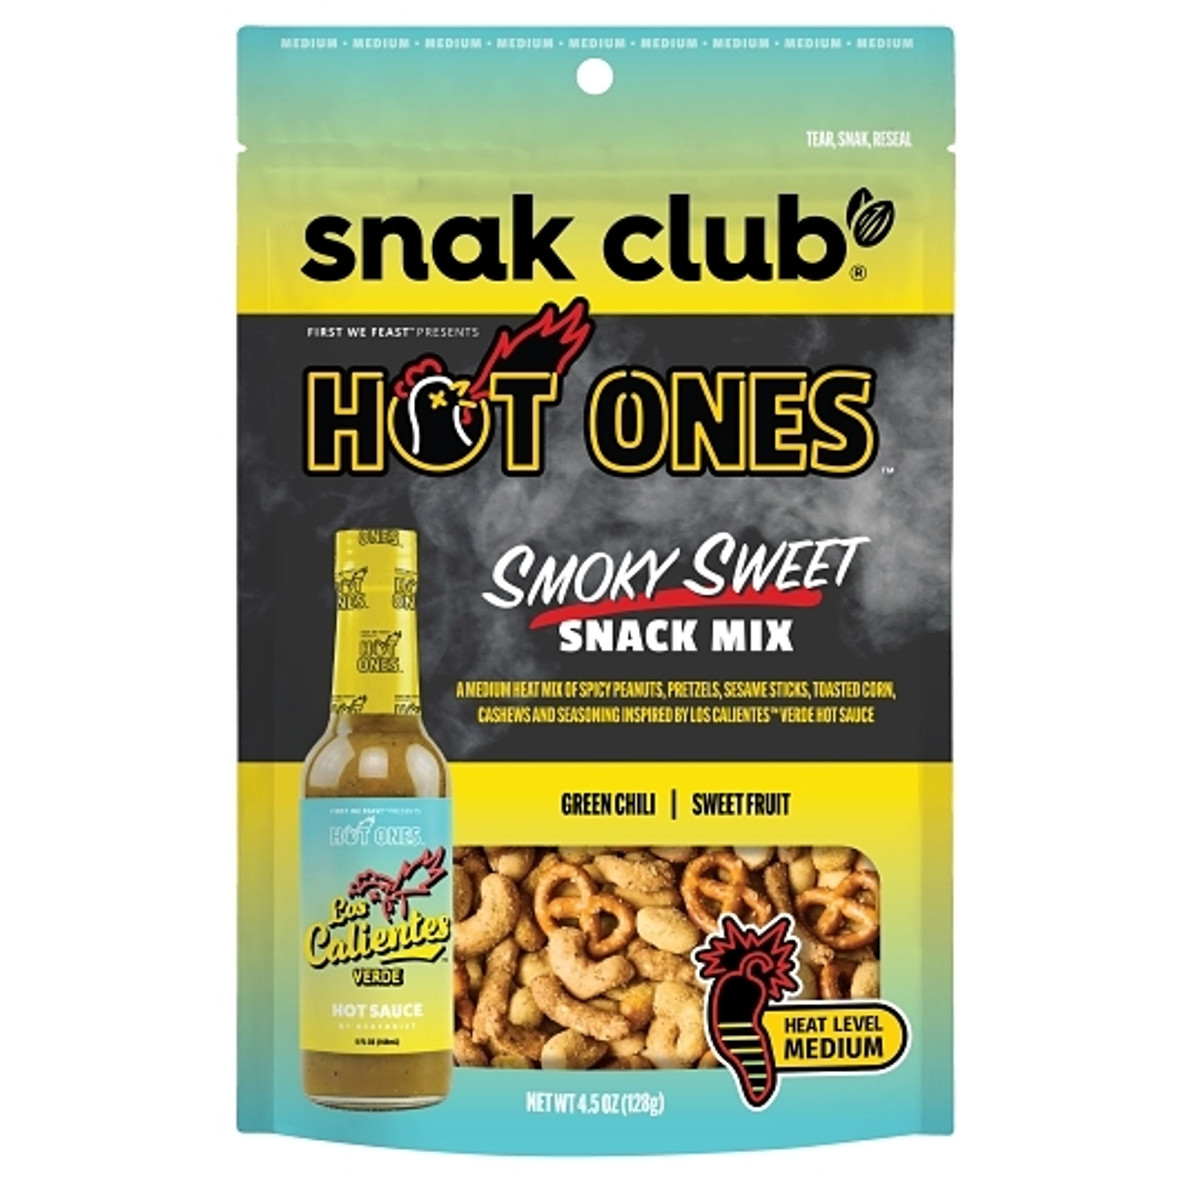 Snak Club Hot Ones Smoky Sweet Snack Mix, 4.5 Ounce, 6 Per Case